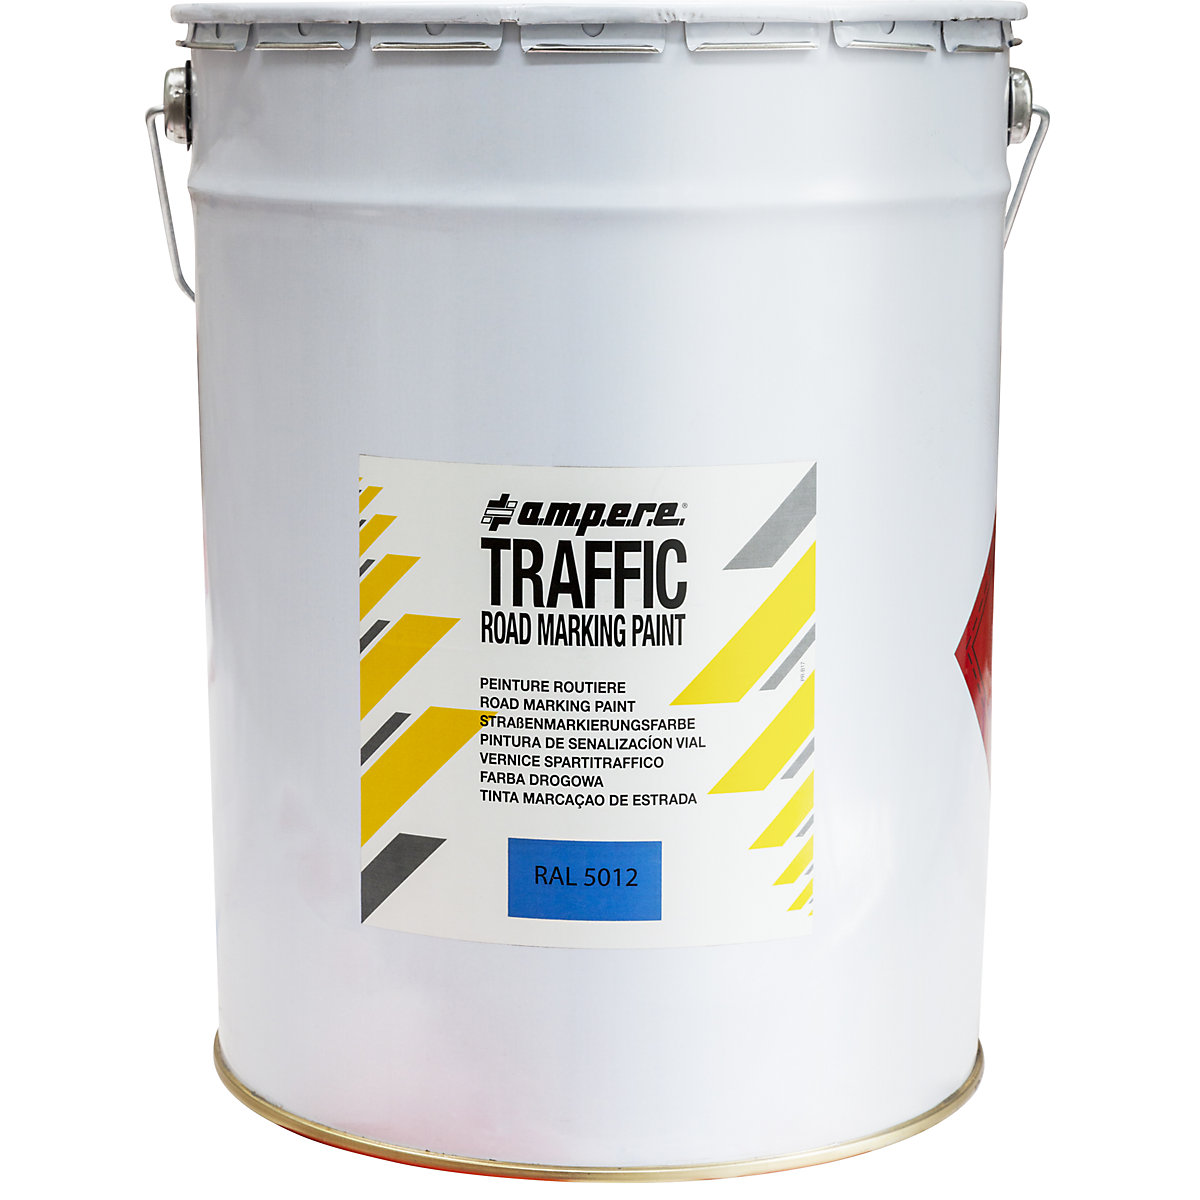 Road marking paint - Ampere